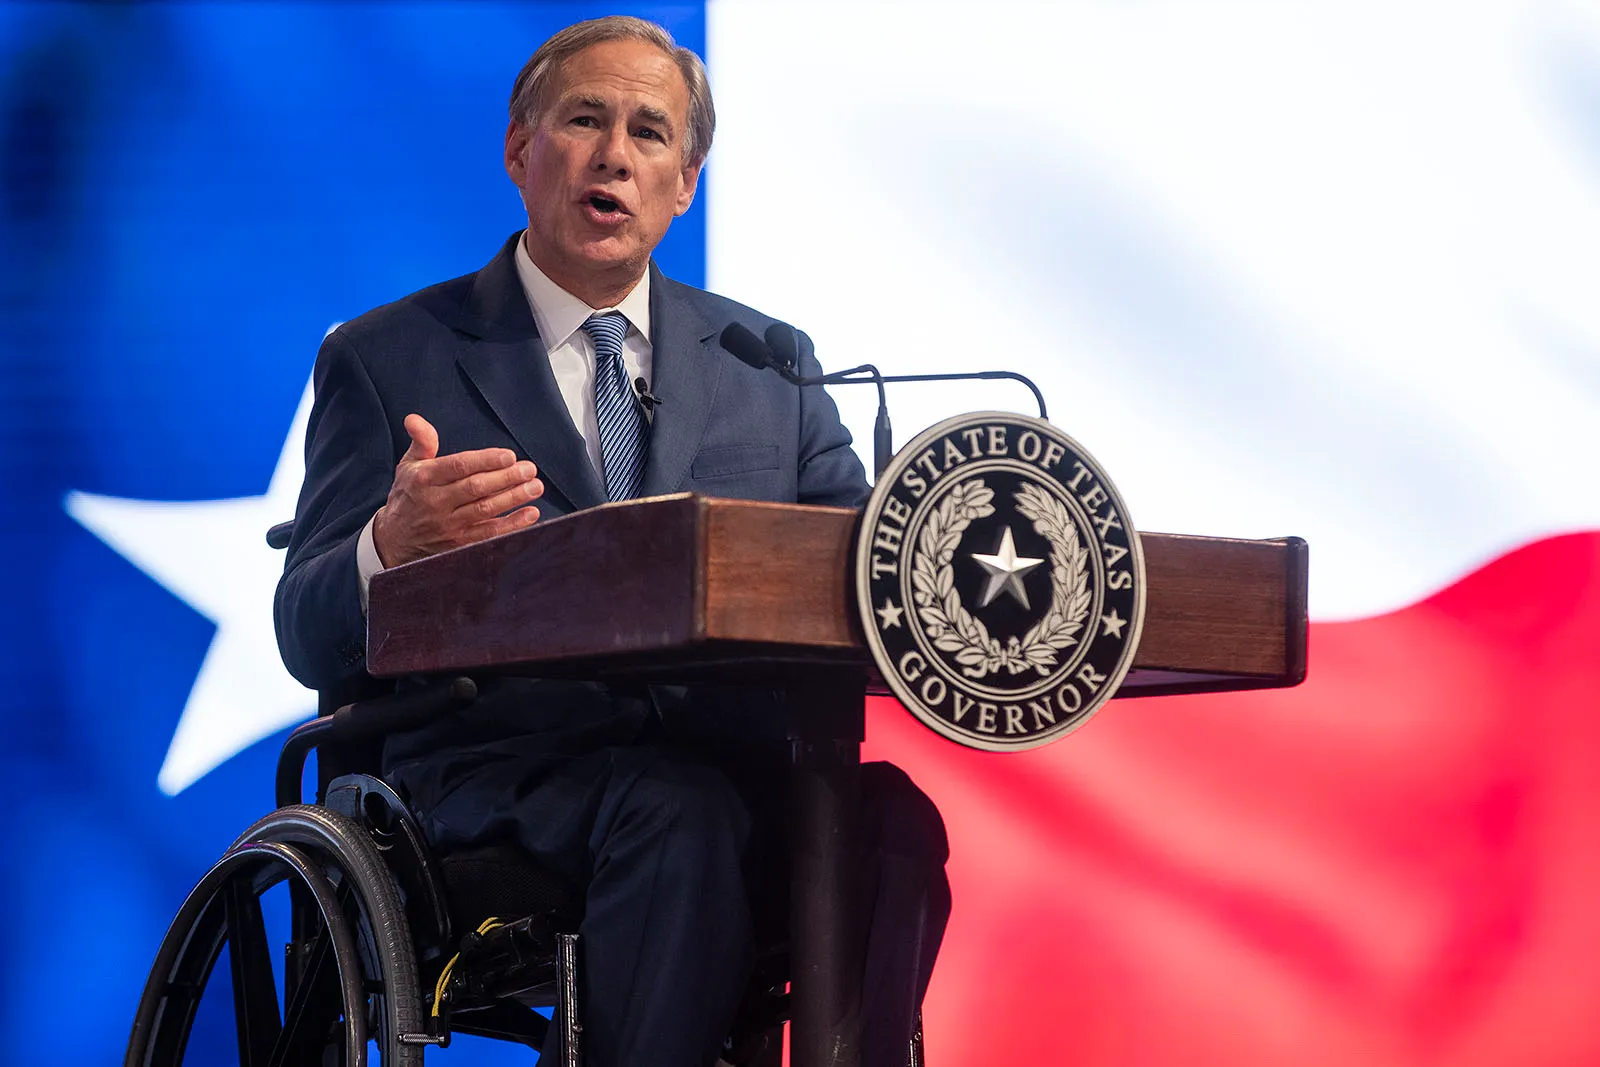 US midterms: The Texas governor’s race - Republican Greg Abbott 
